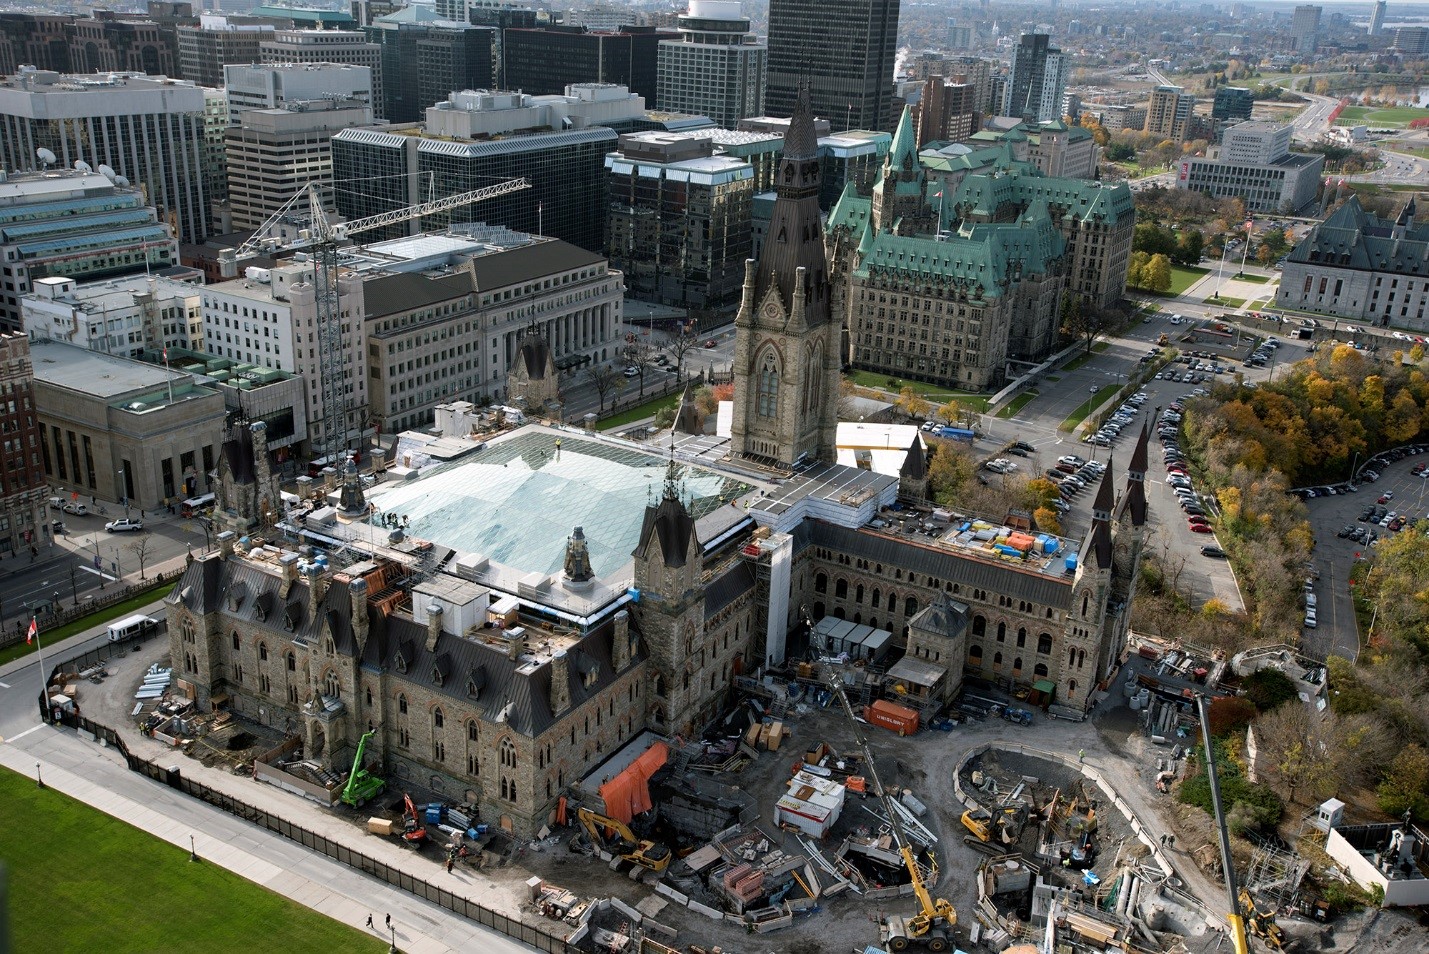 View enlarged image of an aerial photo of a building surrounded by construction vehicles and equipment.